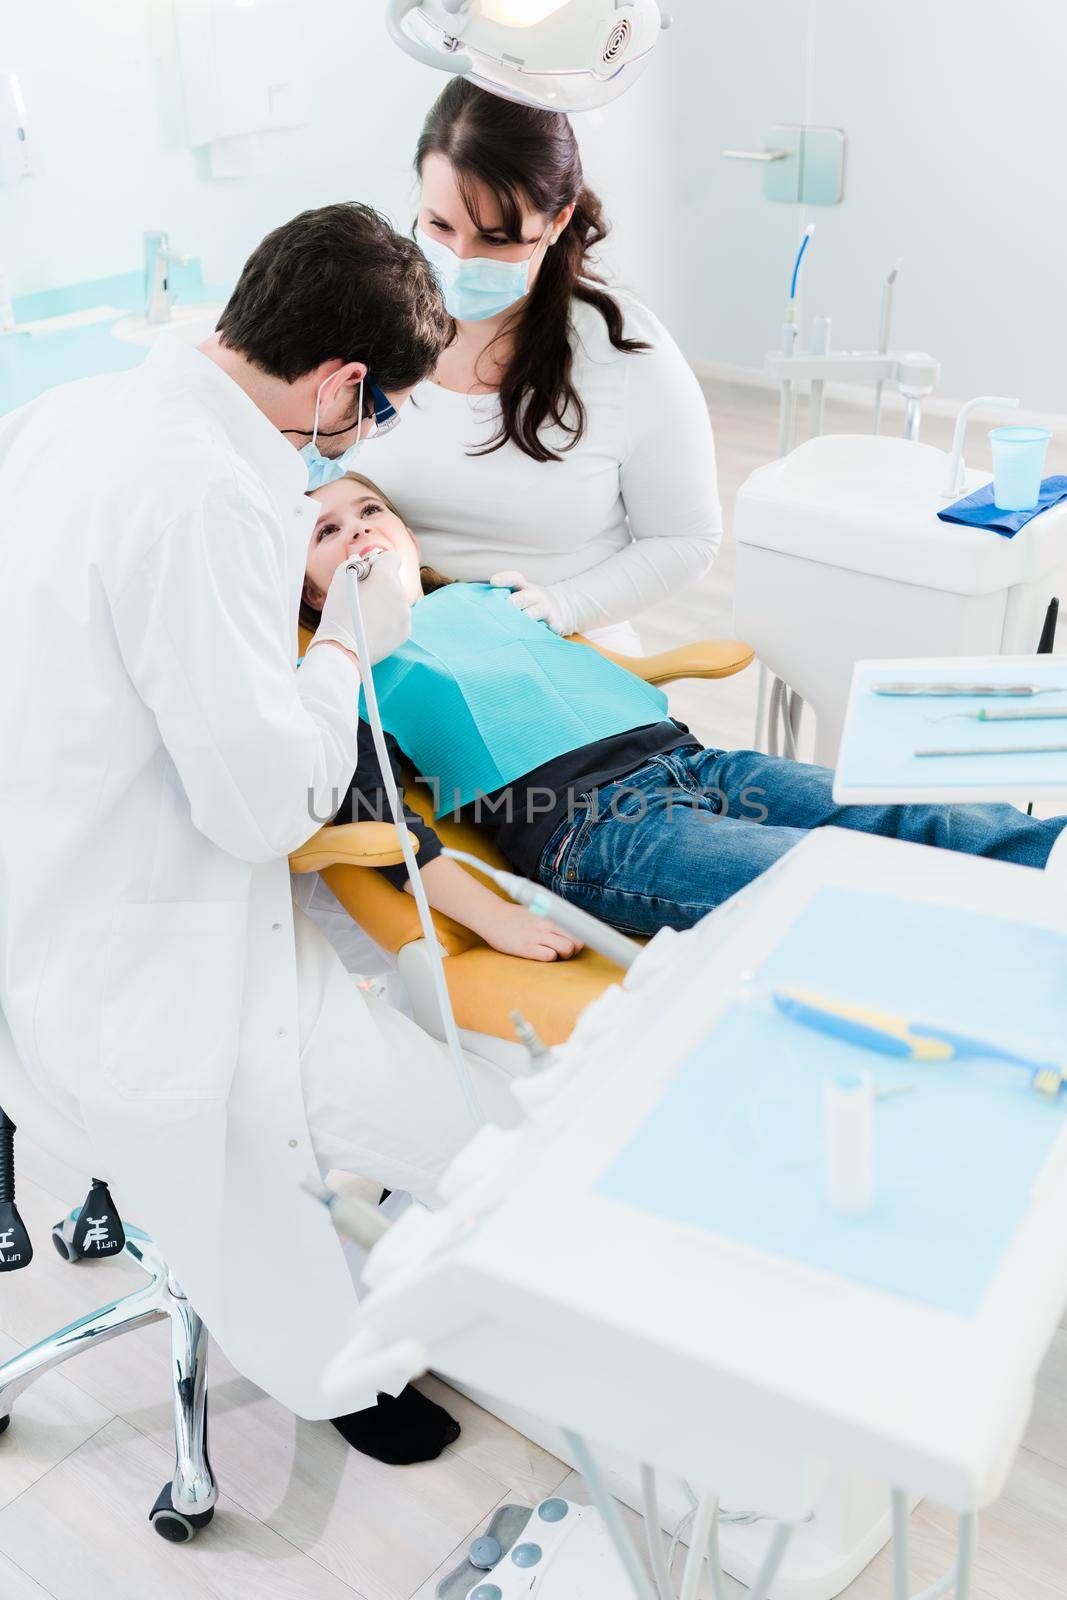 Dentist trearing child in his surgery by Kzenon